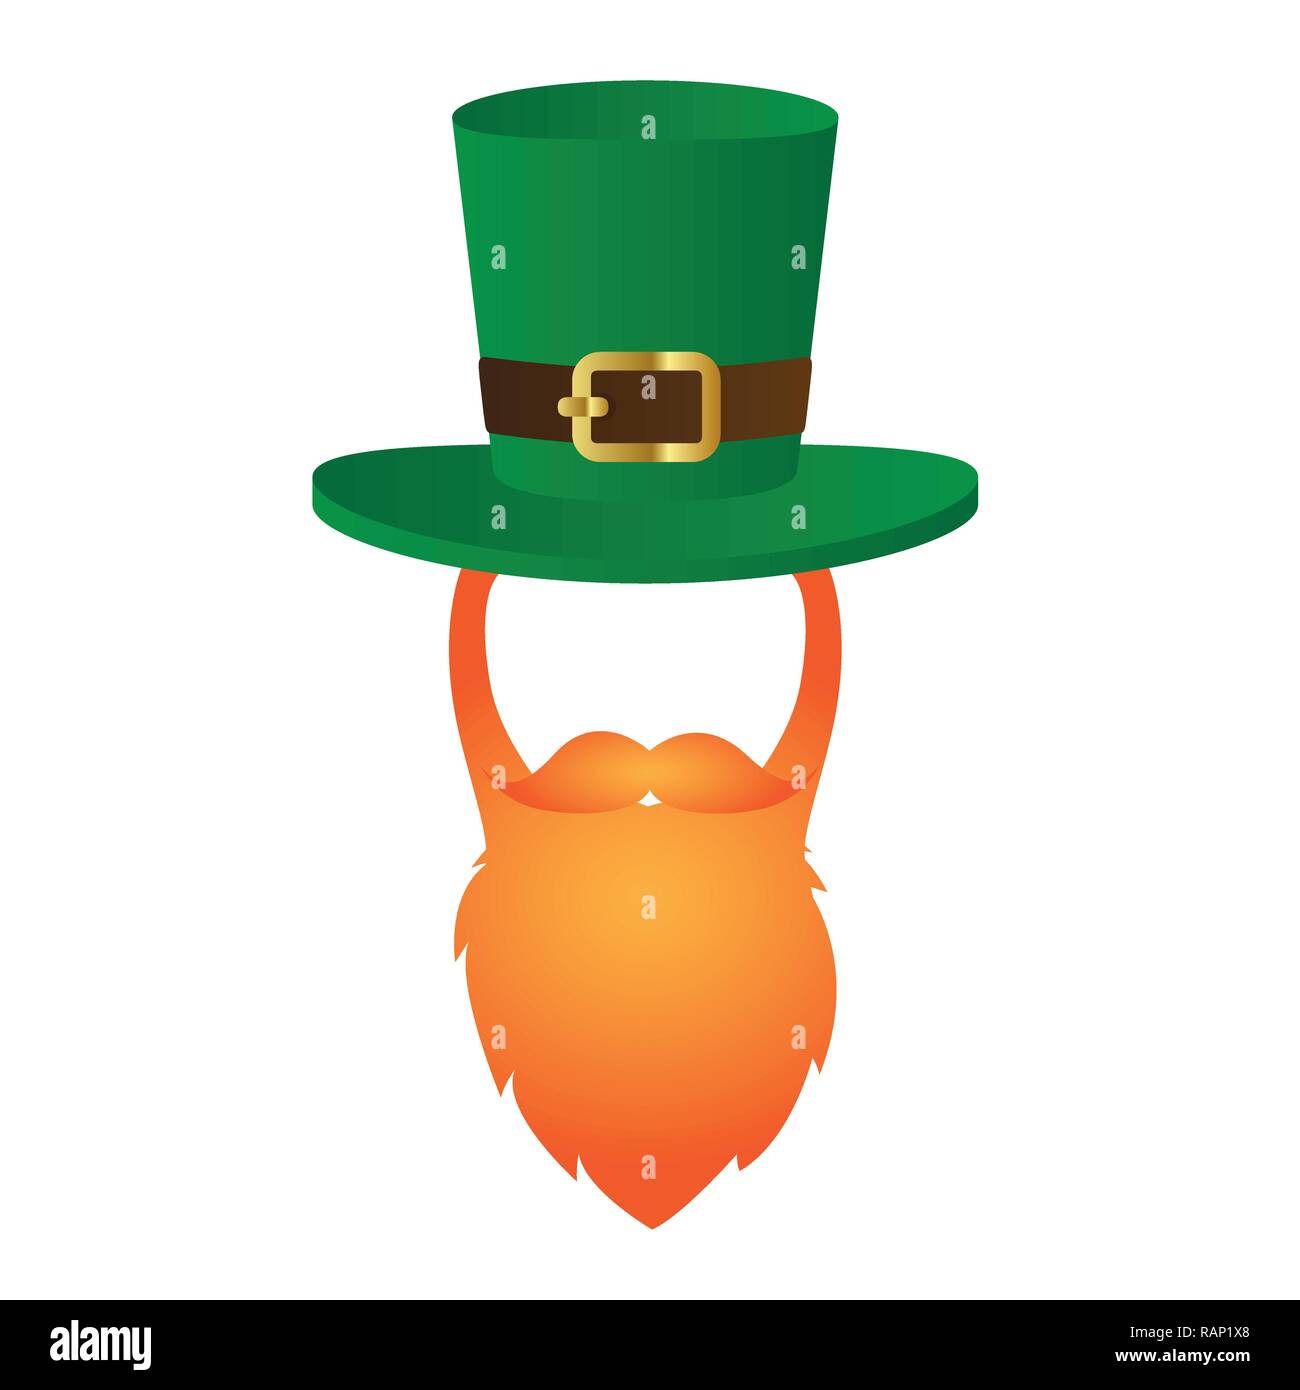 leprechaun character face with red beard and green hat on white background vector illustration EPS10 Stock Vector